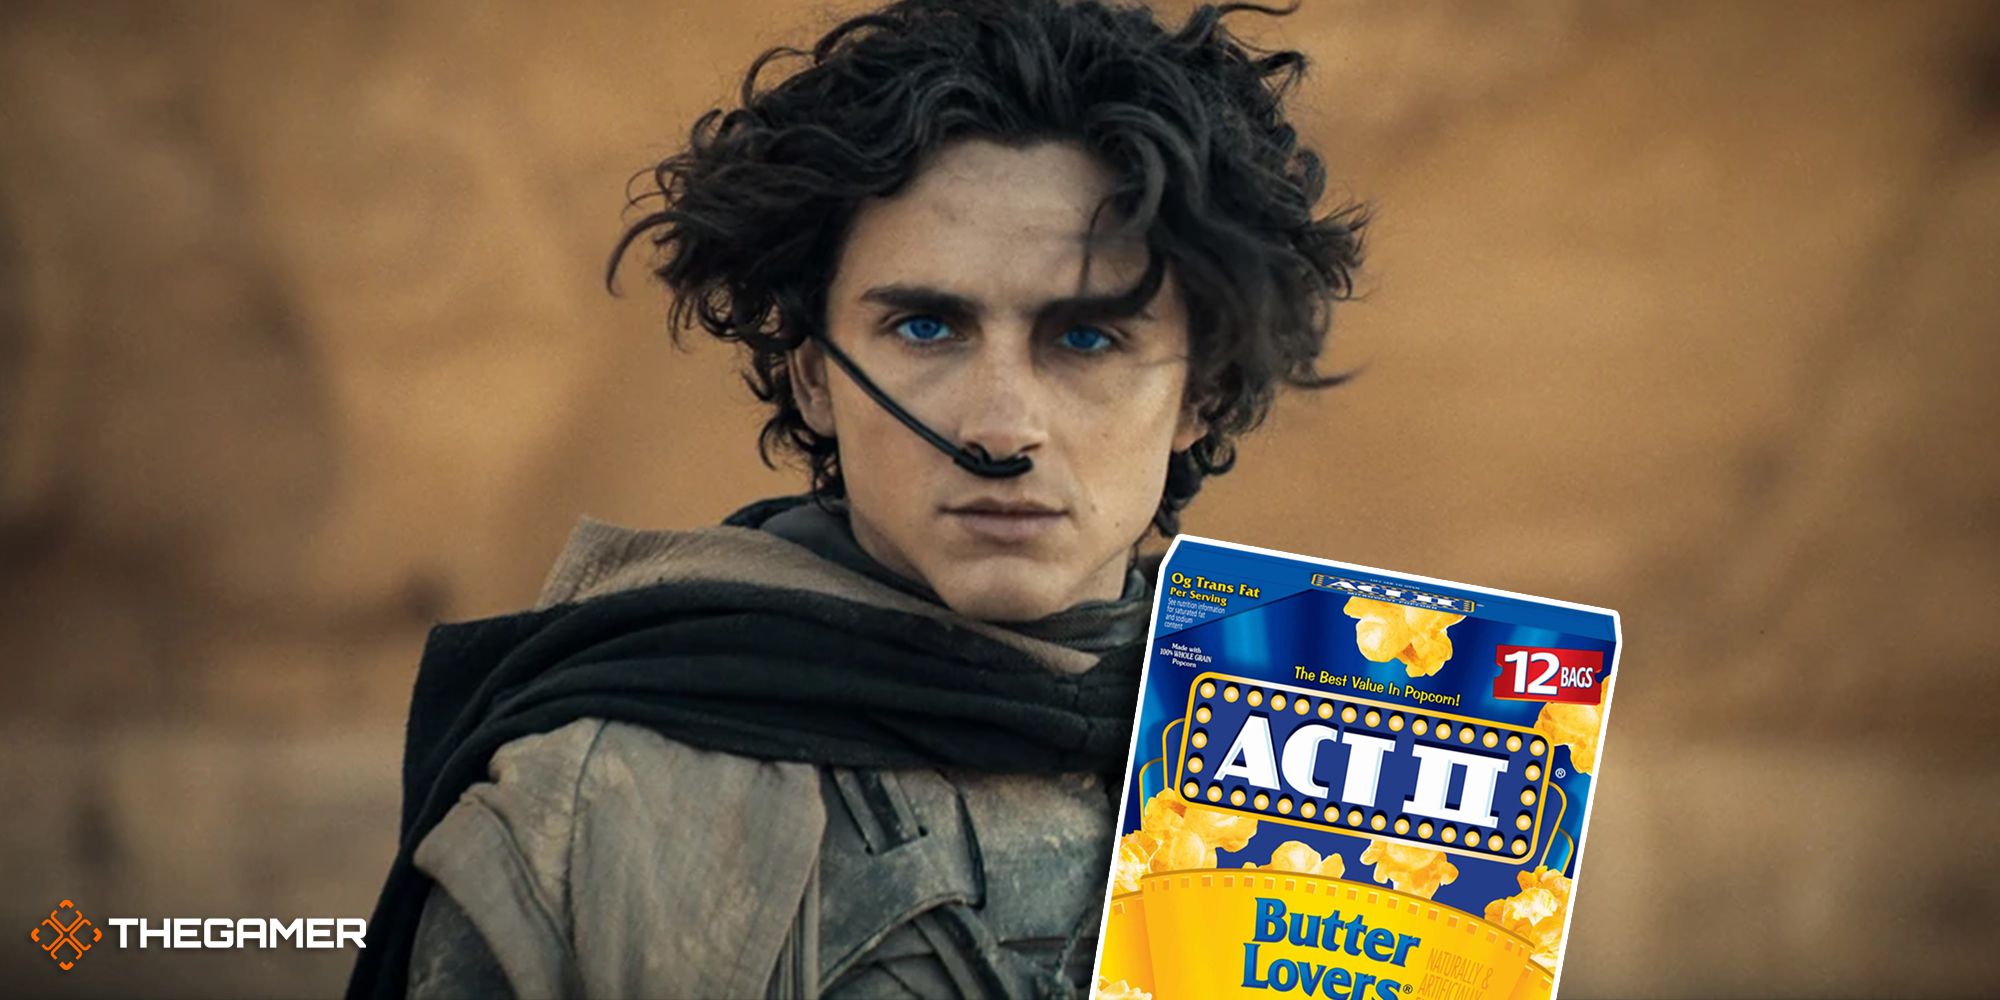 Timothee Chalamet staring into the distance as Paul Atreides with a box of Act 2 Popcorn